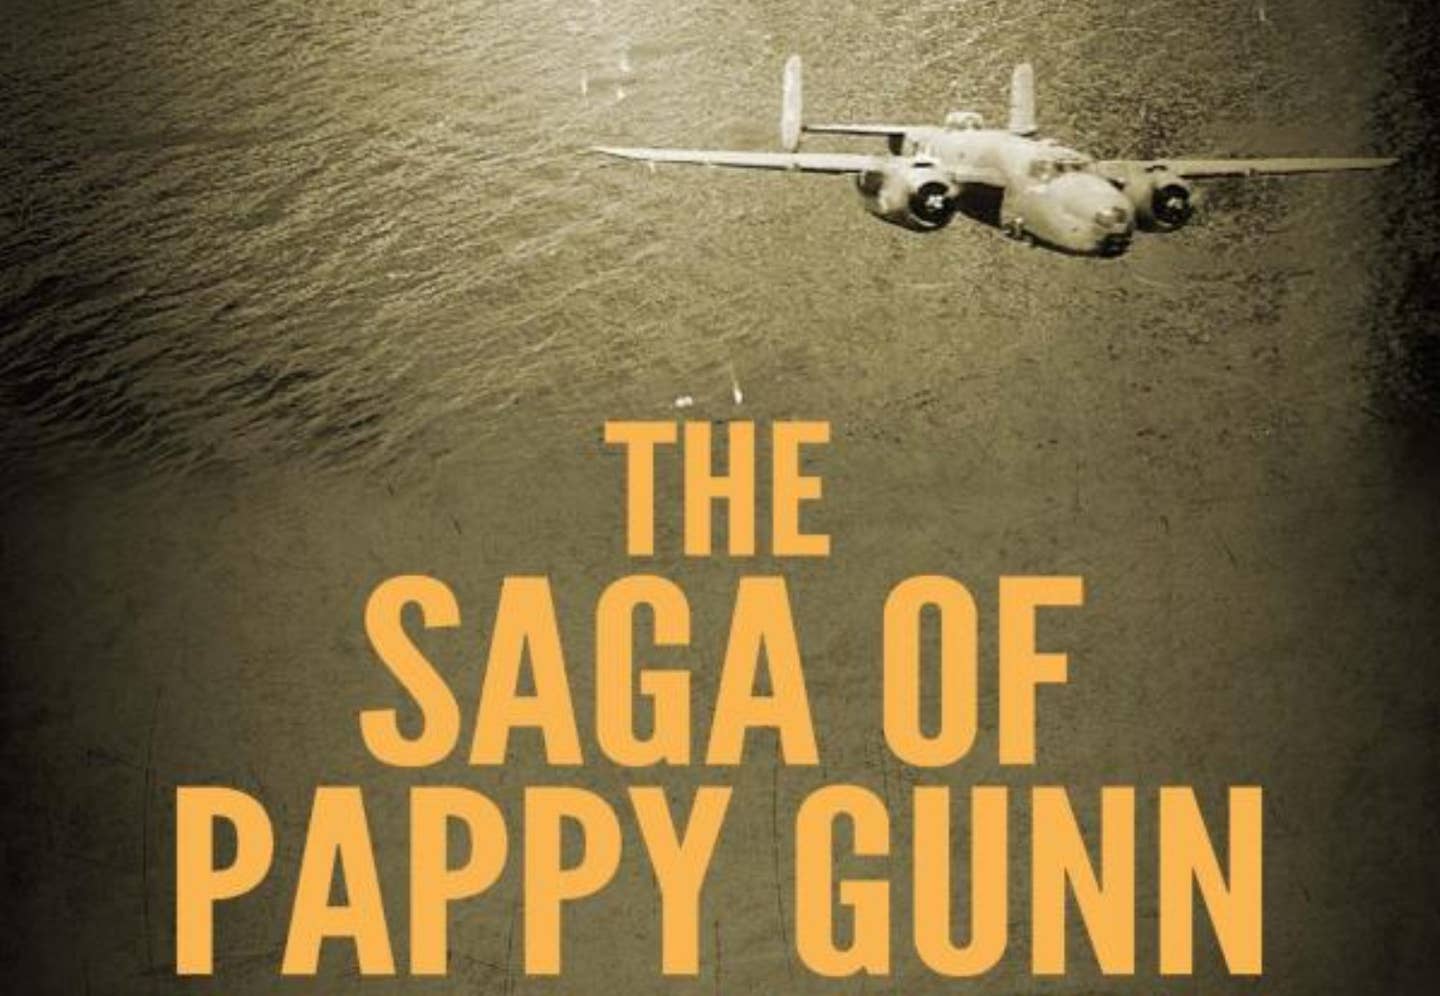 The Saga of Pappy Gunn Paperback – July 8, 2017
by George C. Kenney, Amazon